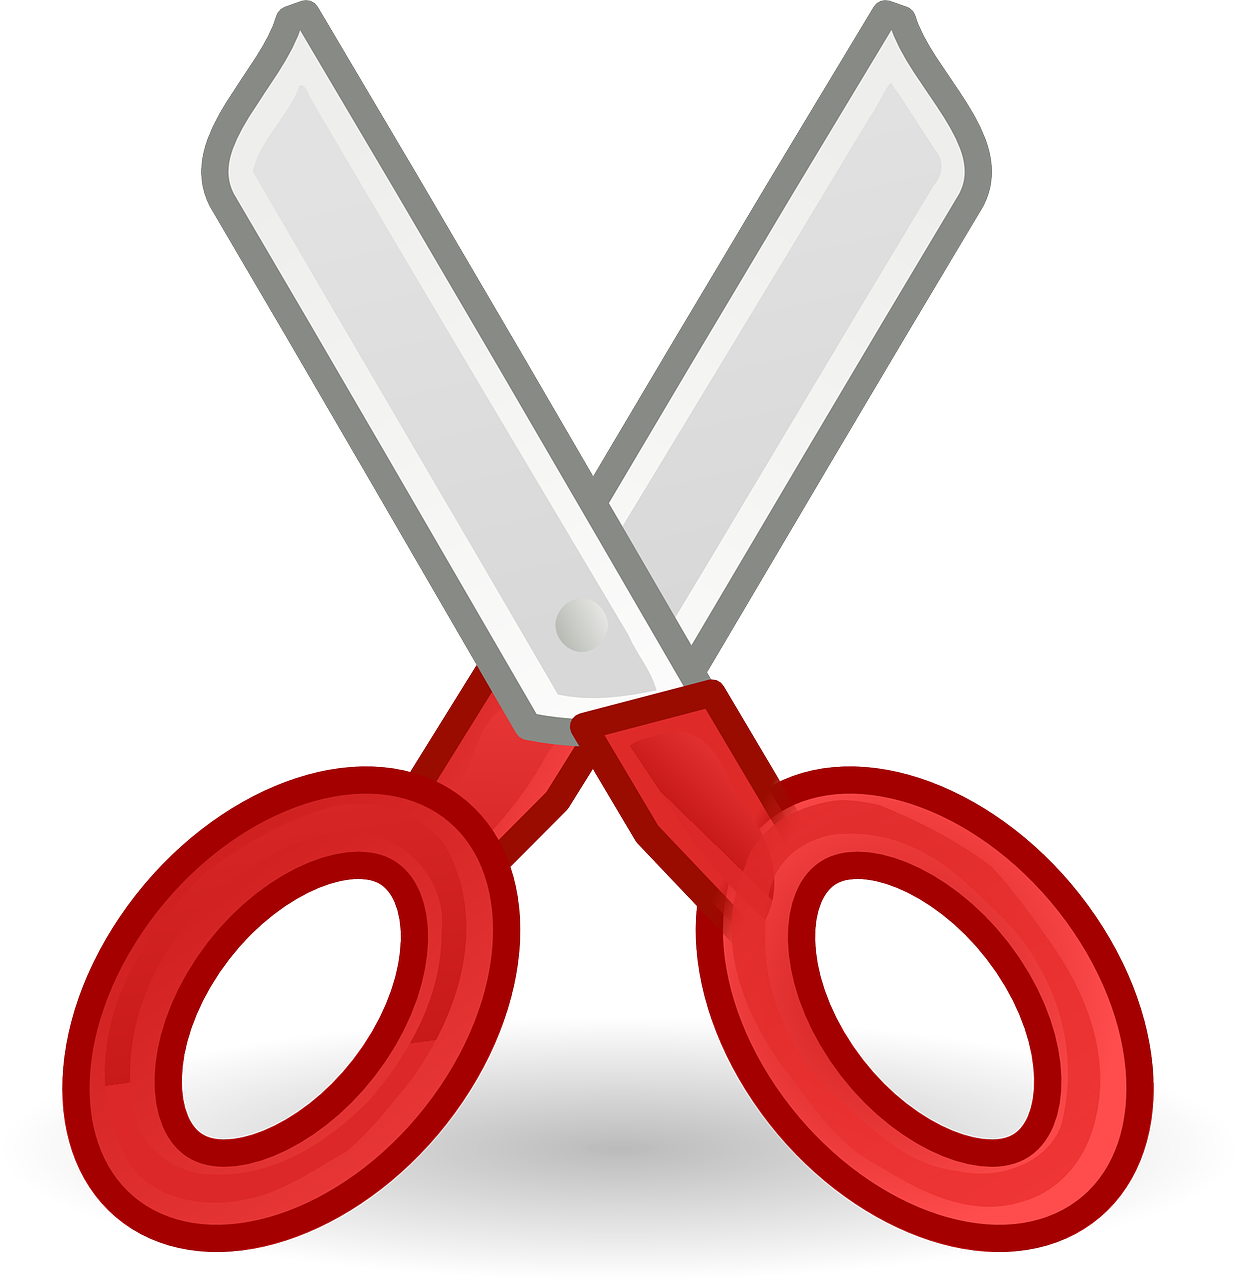 Scissors free to use clipart